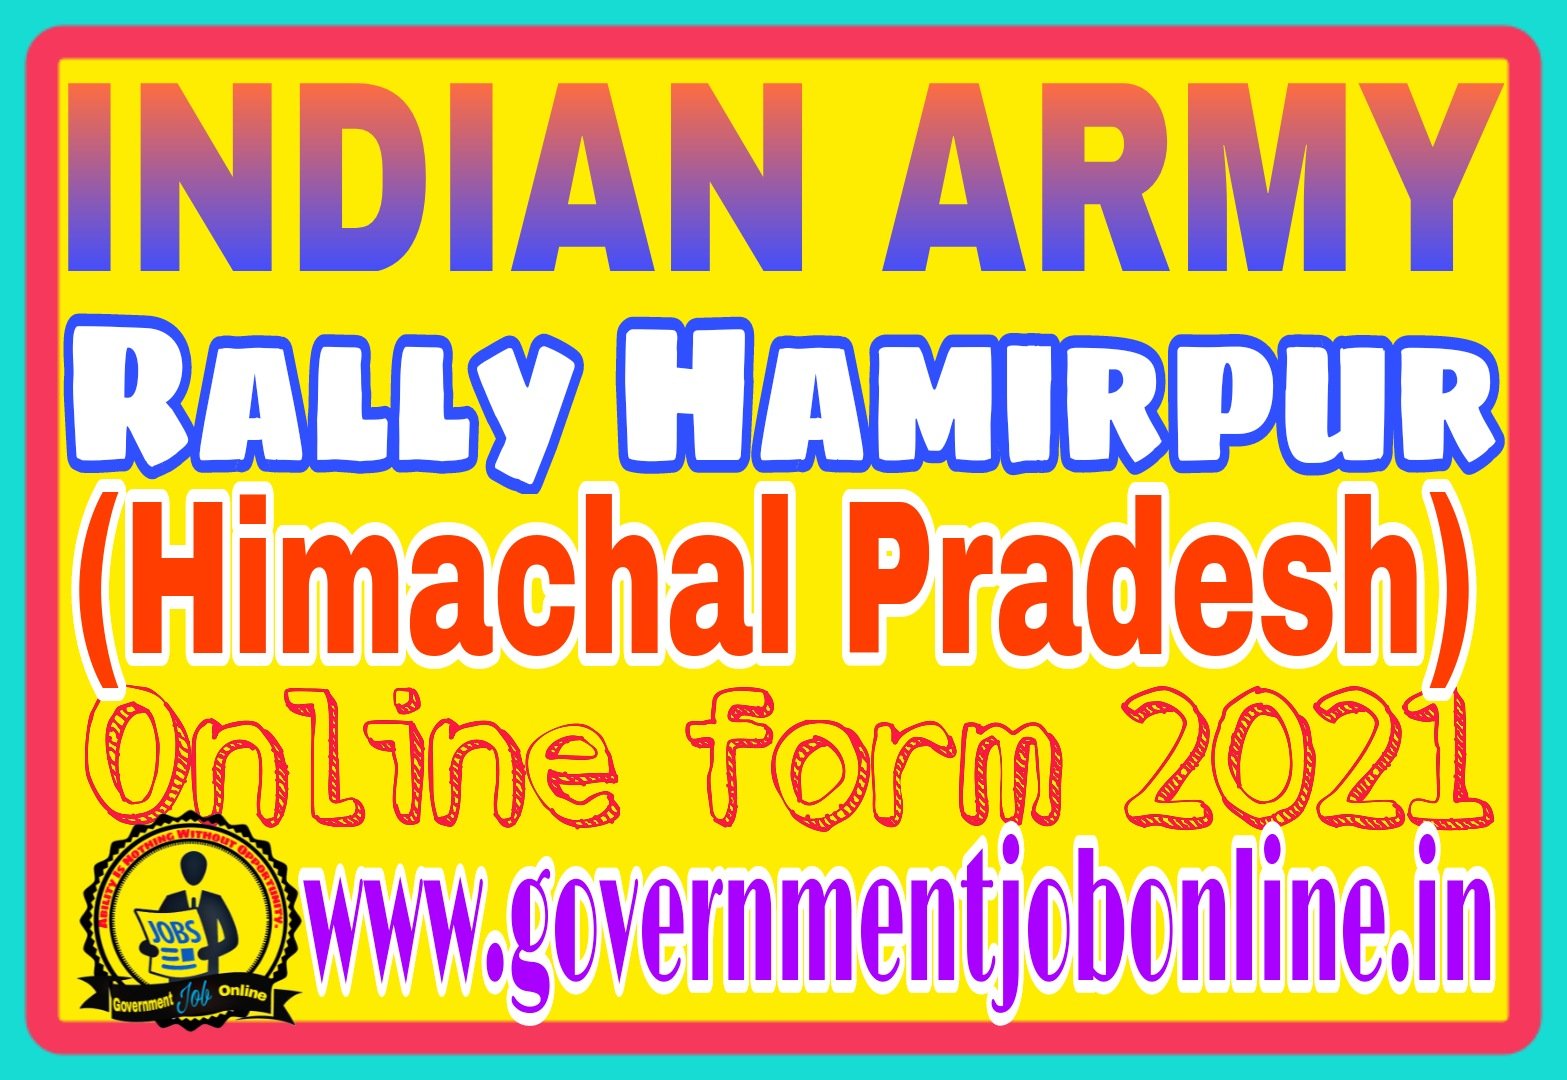 Indian Army Rally Himachal Pradesh Online Form 2020